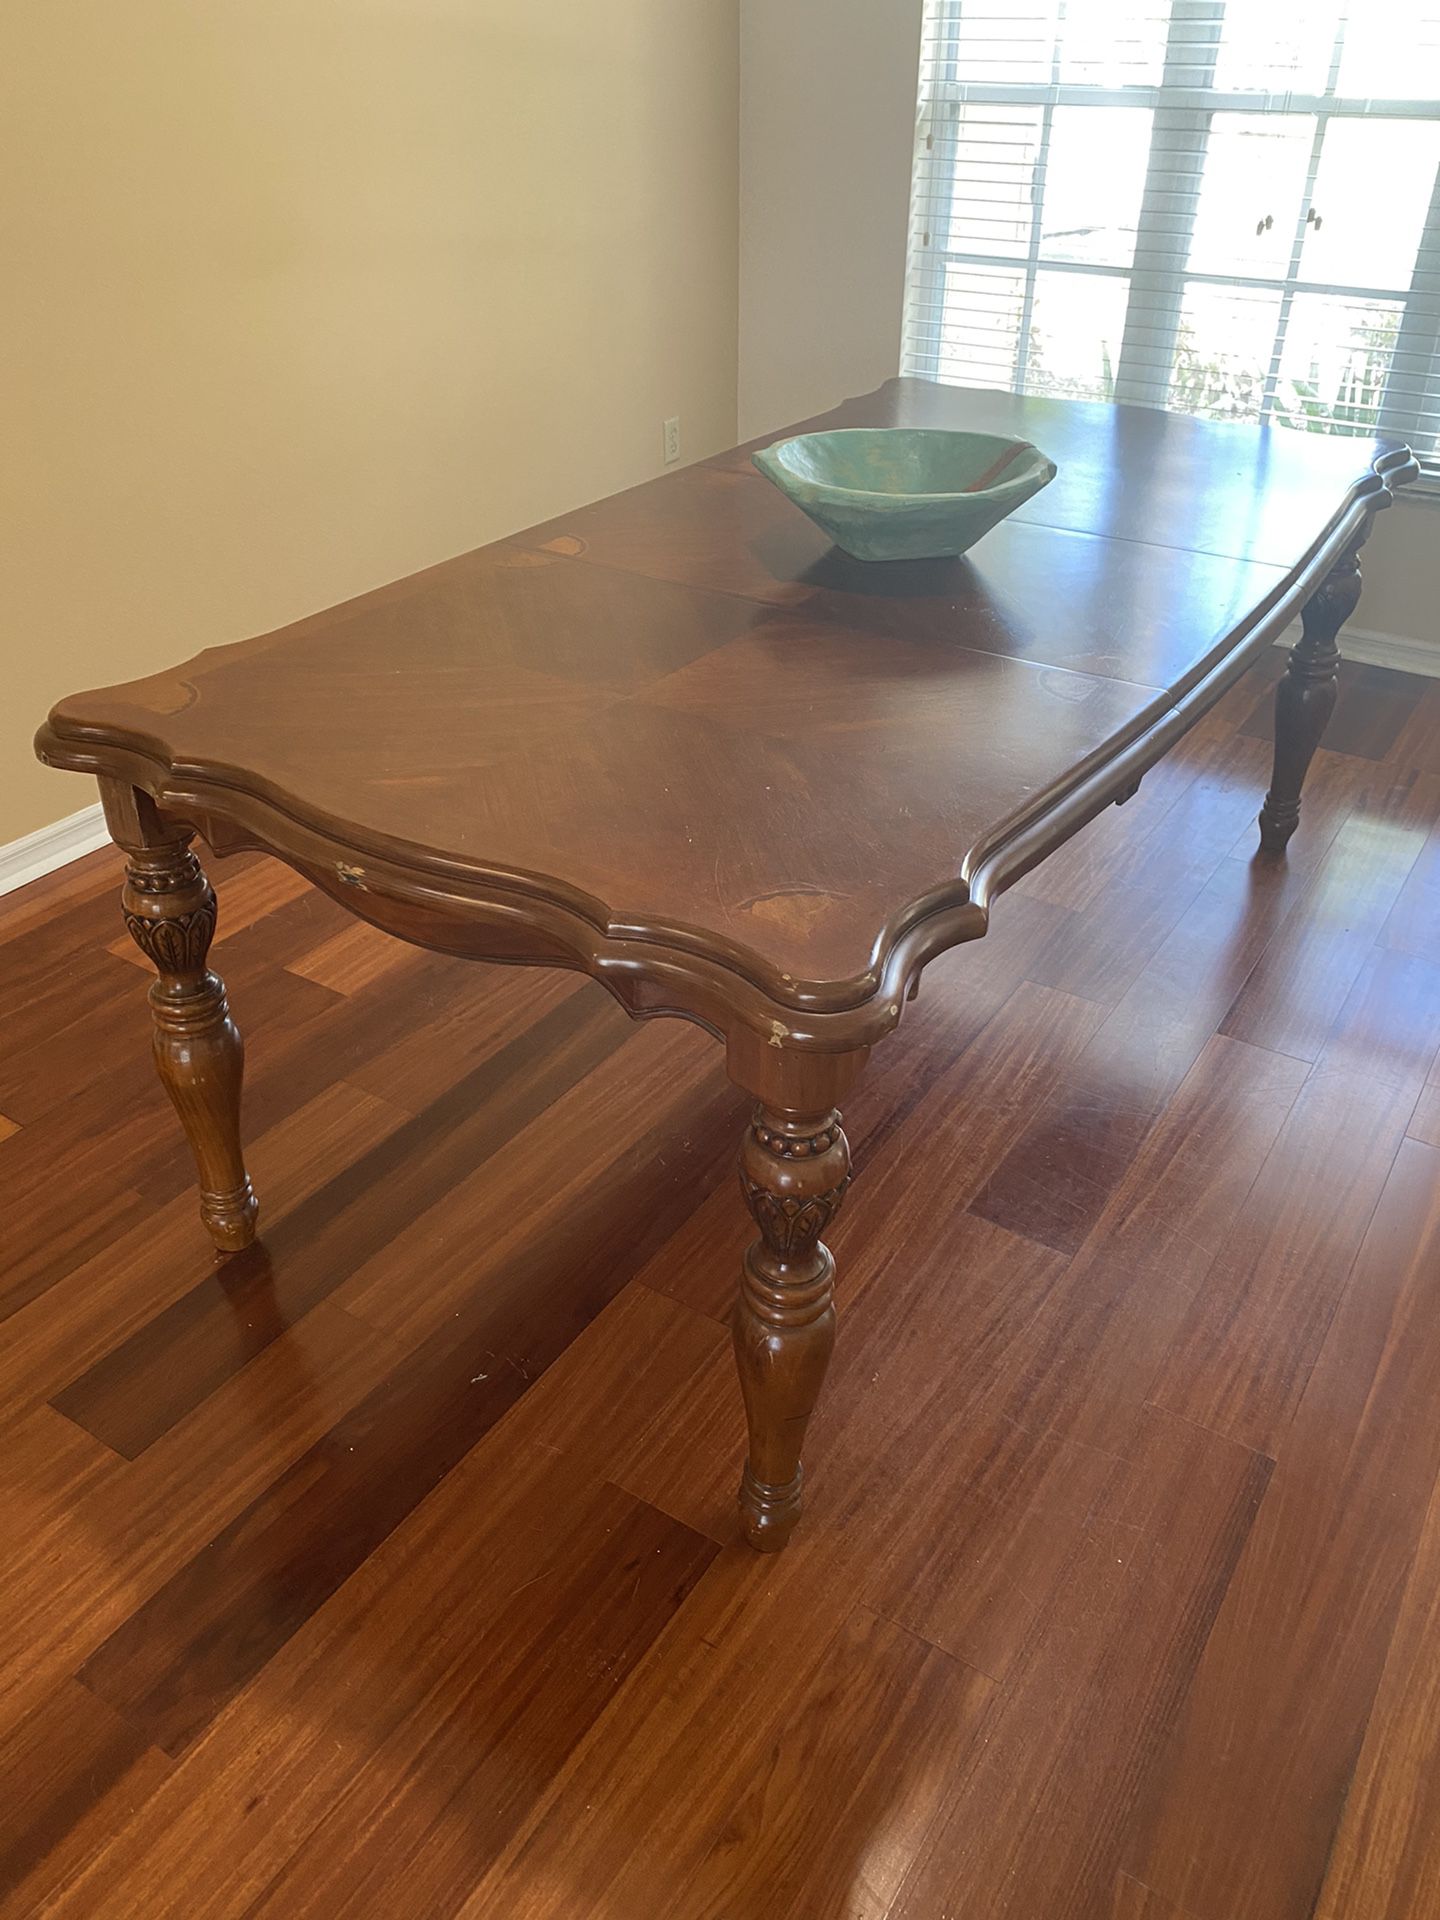 Dining room table with 6 chairs